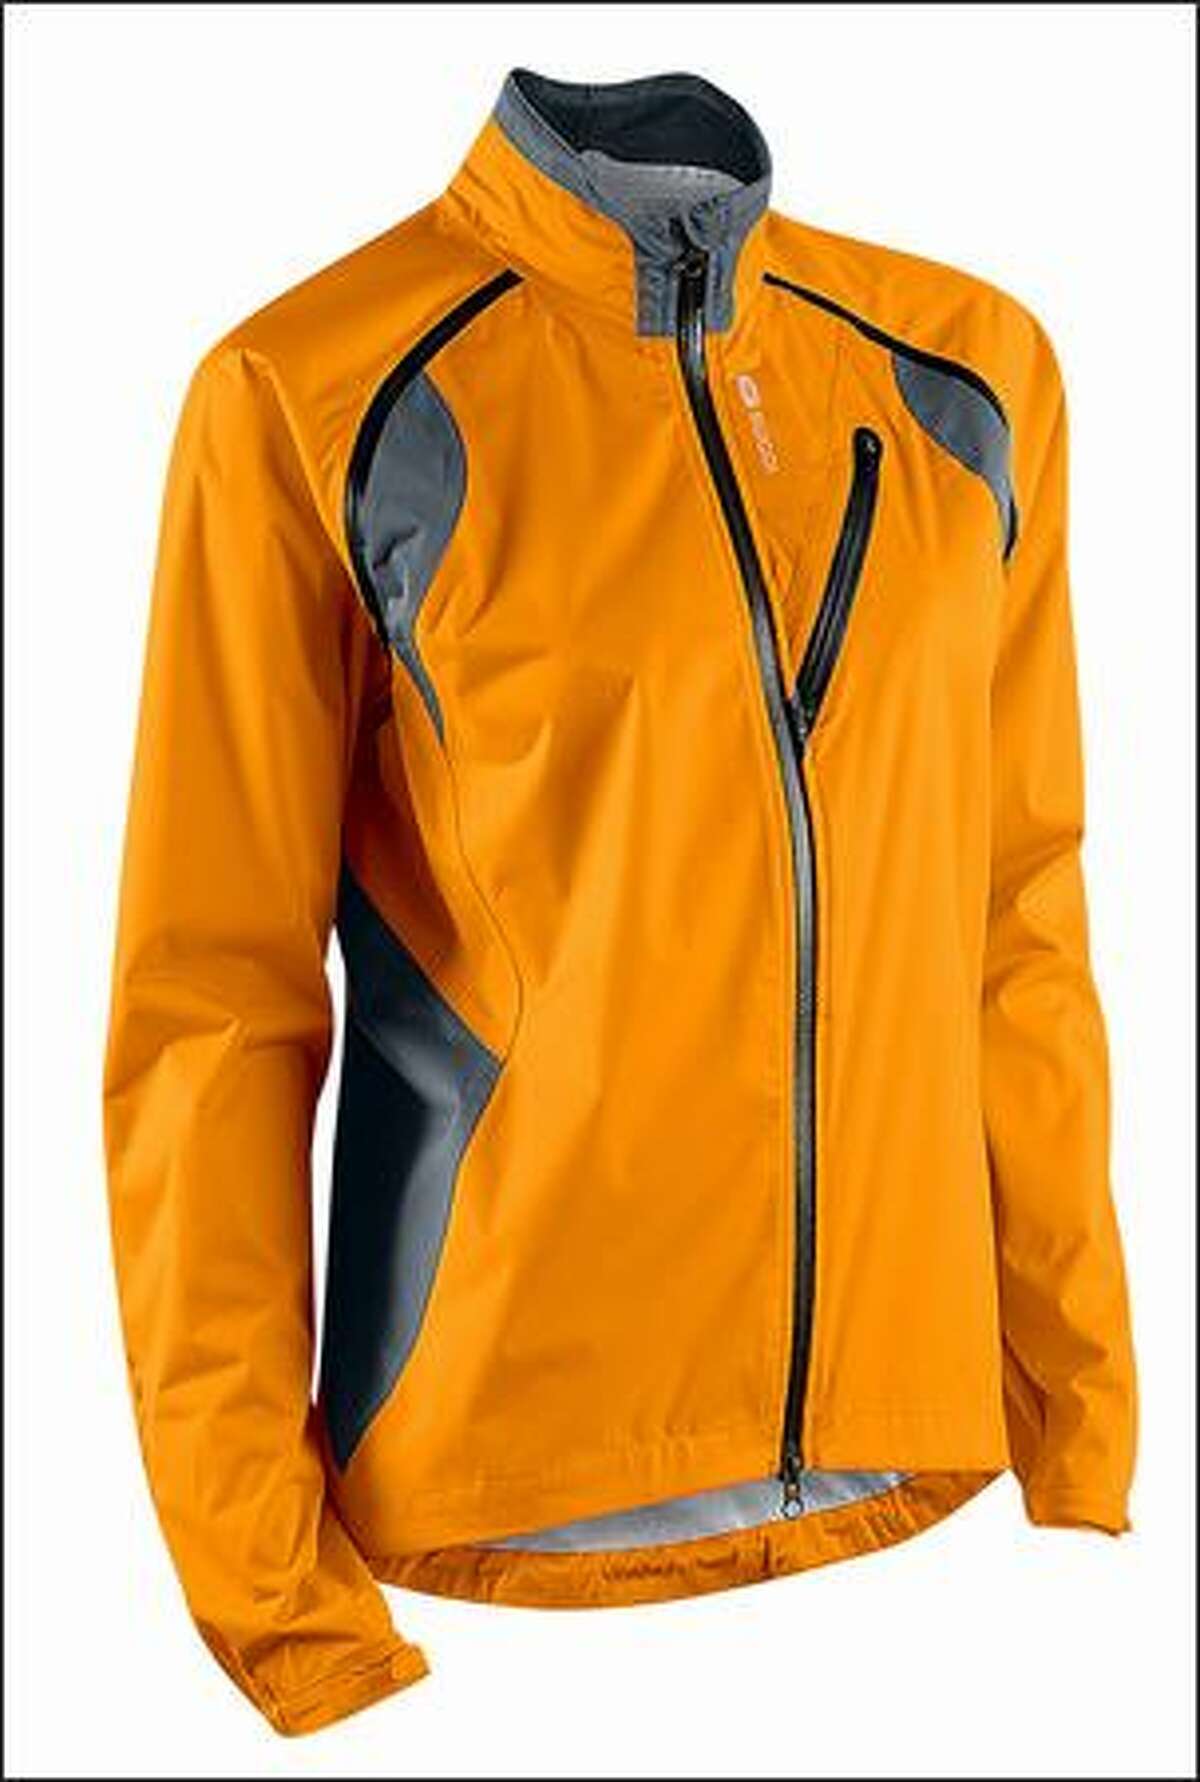 The Majik aerobic-sports jacket comes in a men’s and women’s model and costs $170.